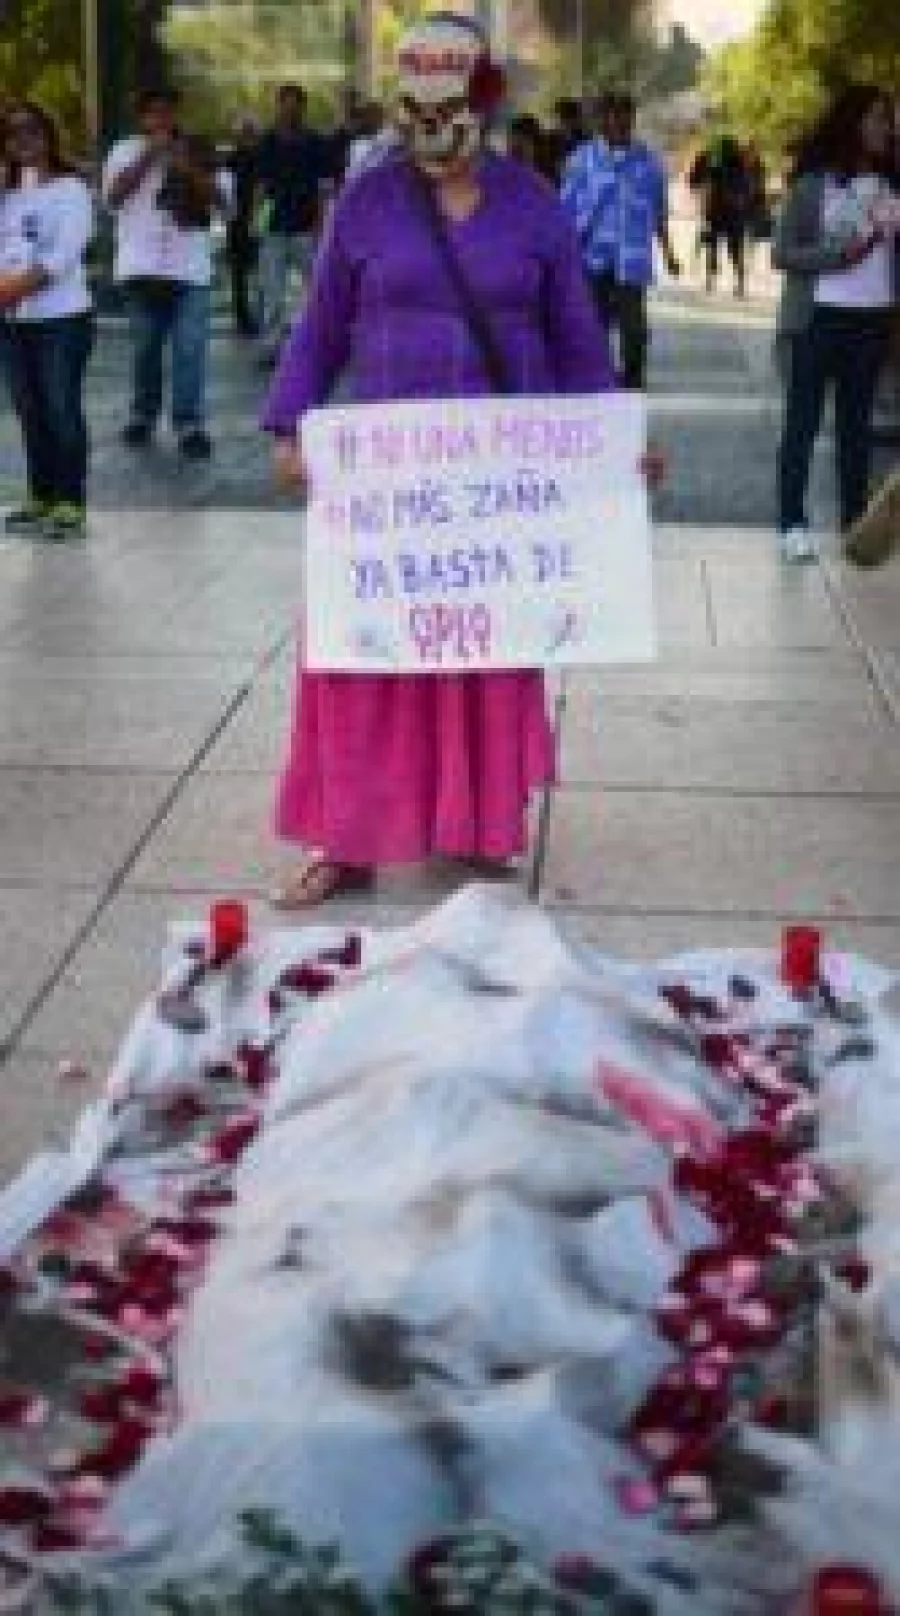 Women take part in a march on October 19, 2016 in Mexico City to protest against violence against women and in solidarity for the brutal killing of a 16-year-old girl in Mar del Plata, Argentina last week. The killing, in which the high school student was allegedly raped and impaled on a spike by drug dealers, is just the latest incident of horrific gender violence in Argentina, which has seen more than a year of mass marches to protest brutality against women. / AFP PHOTO / ALFREDO ESTRELLA